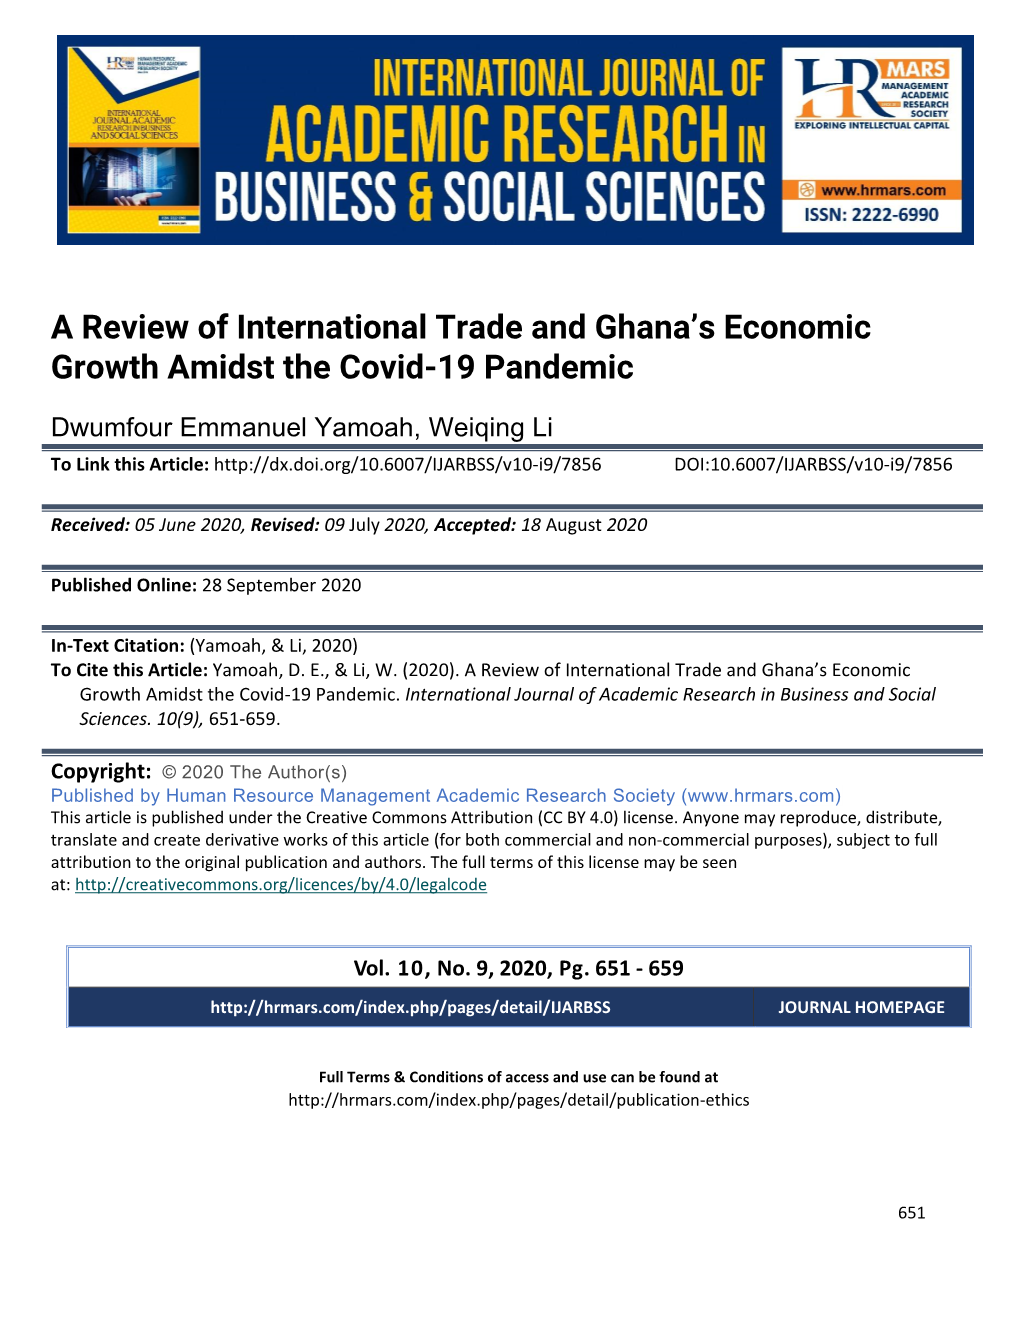 A Review of International Trade and Ghana's Economic Growth Amidst the Covid-19 Pandemic